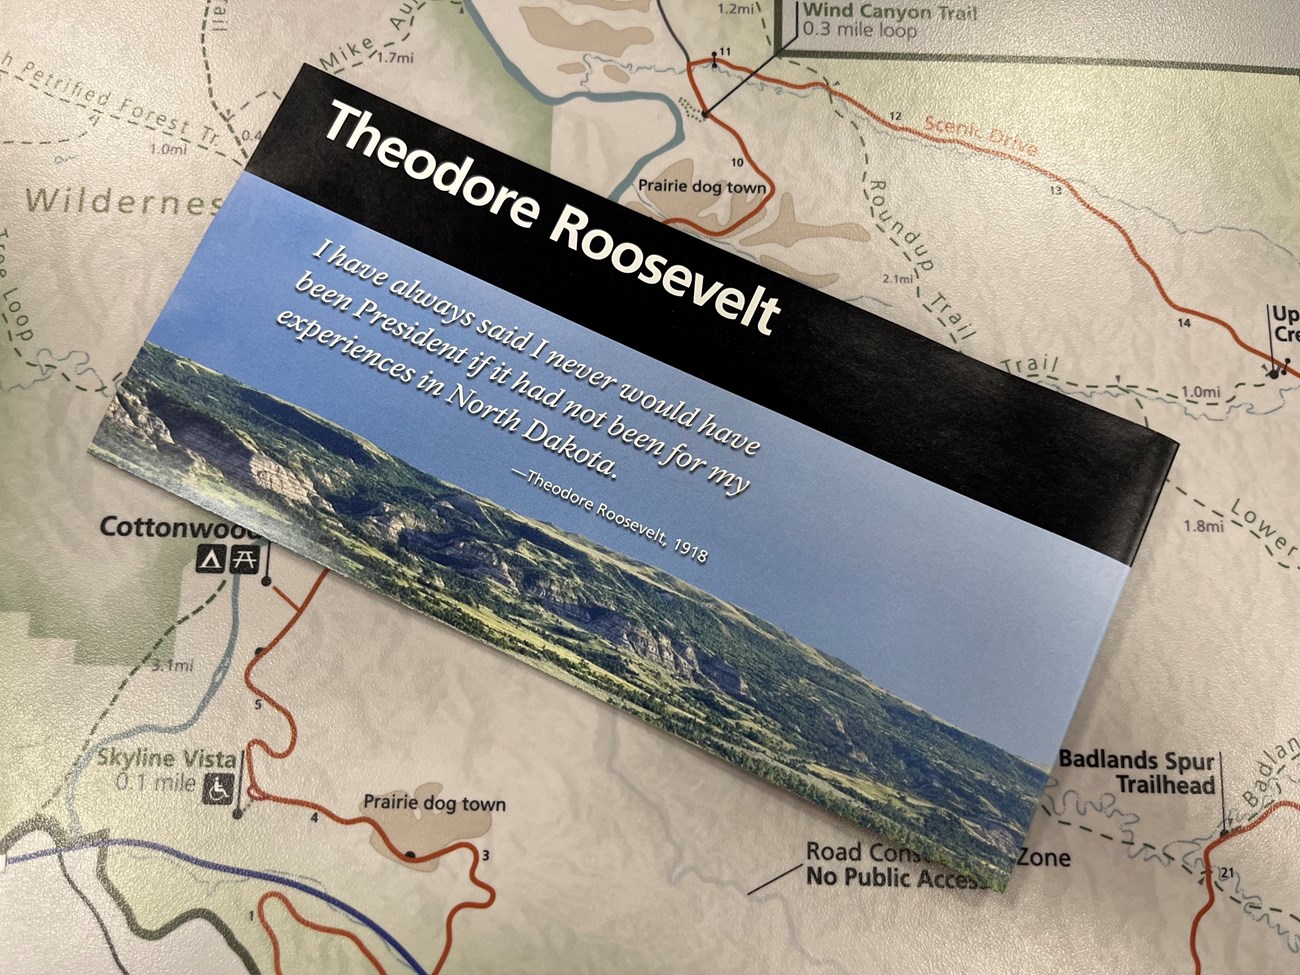 Theodore Roosevelt National Park brochure on top of a park map